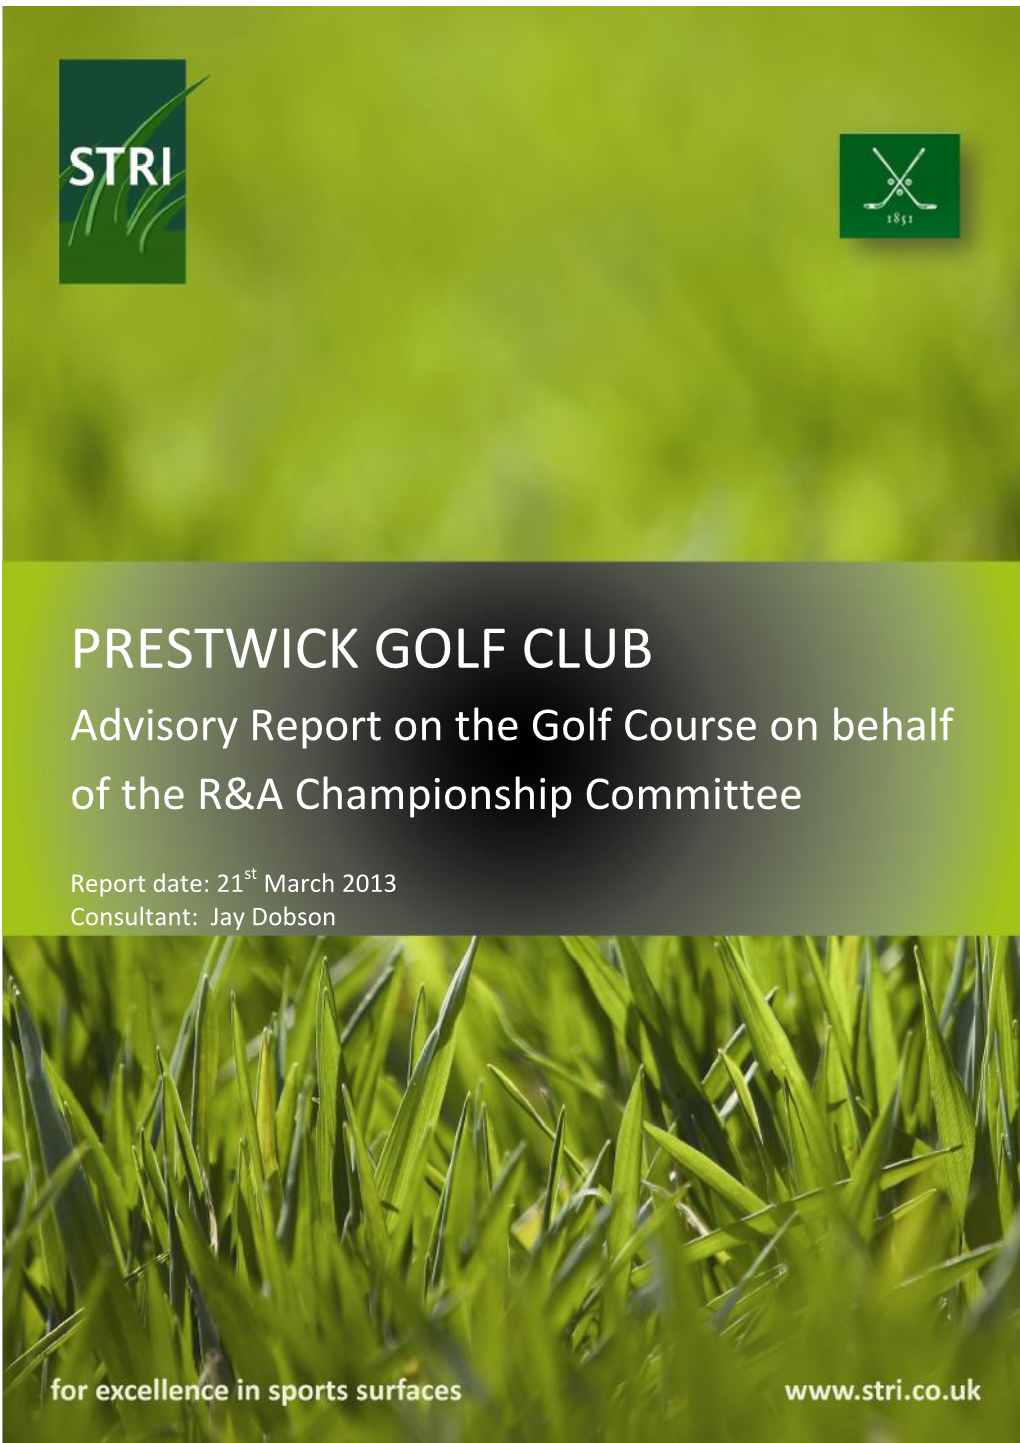 Advisory Report on the Golf Course on Behalf of the R&A Championship